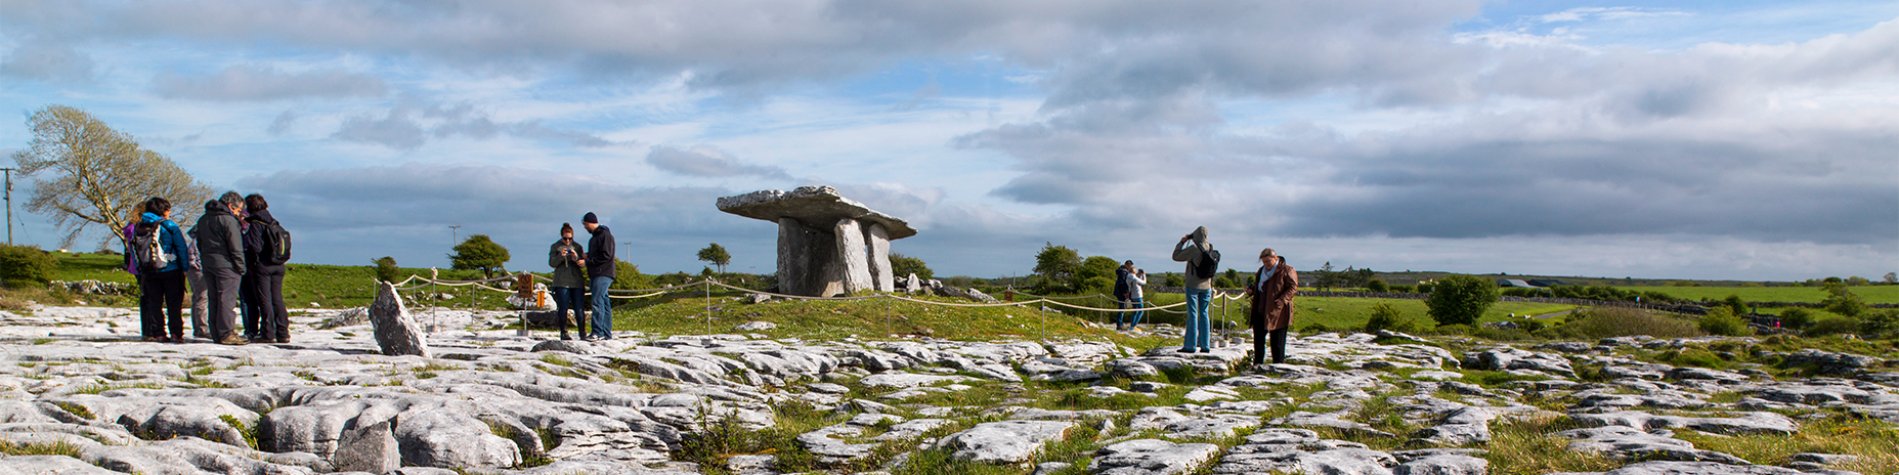 9 Attractions Educating About Irish Nature in the Burren and More